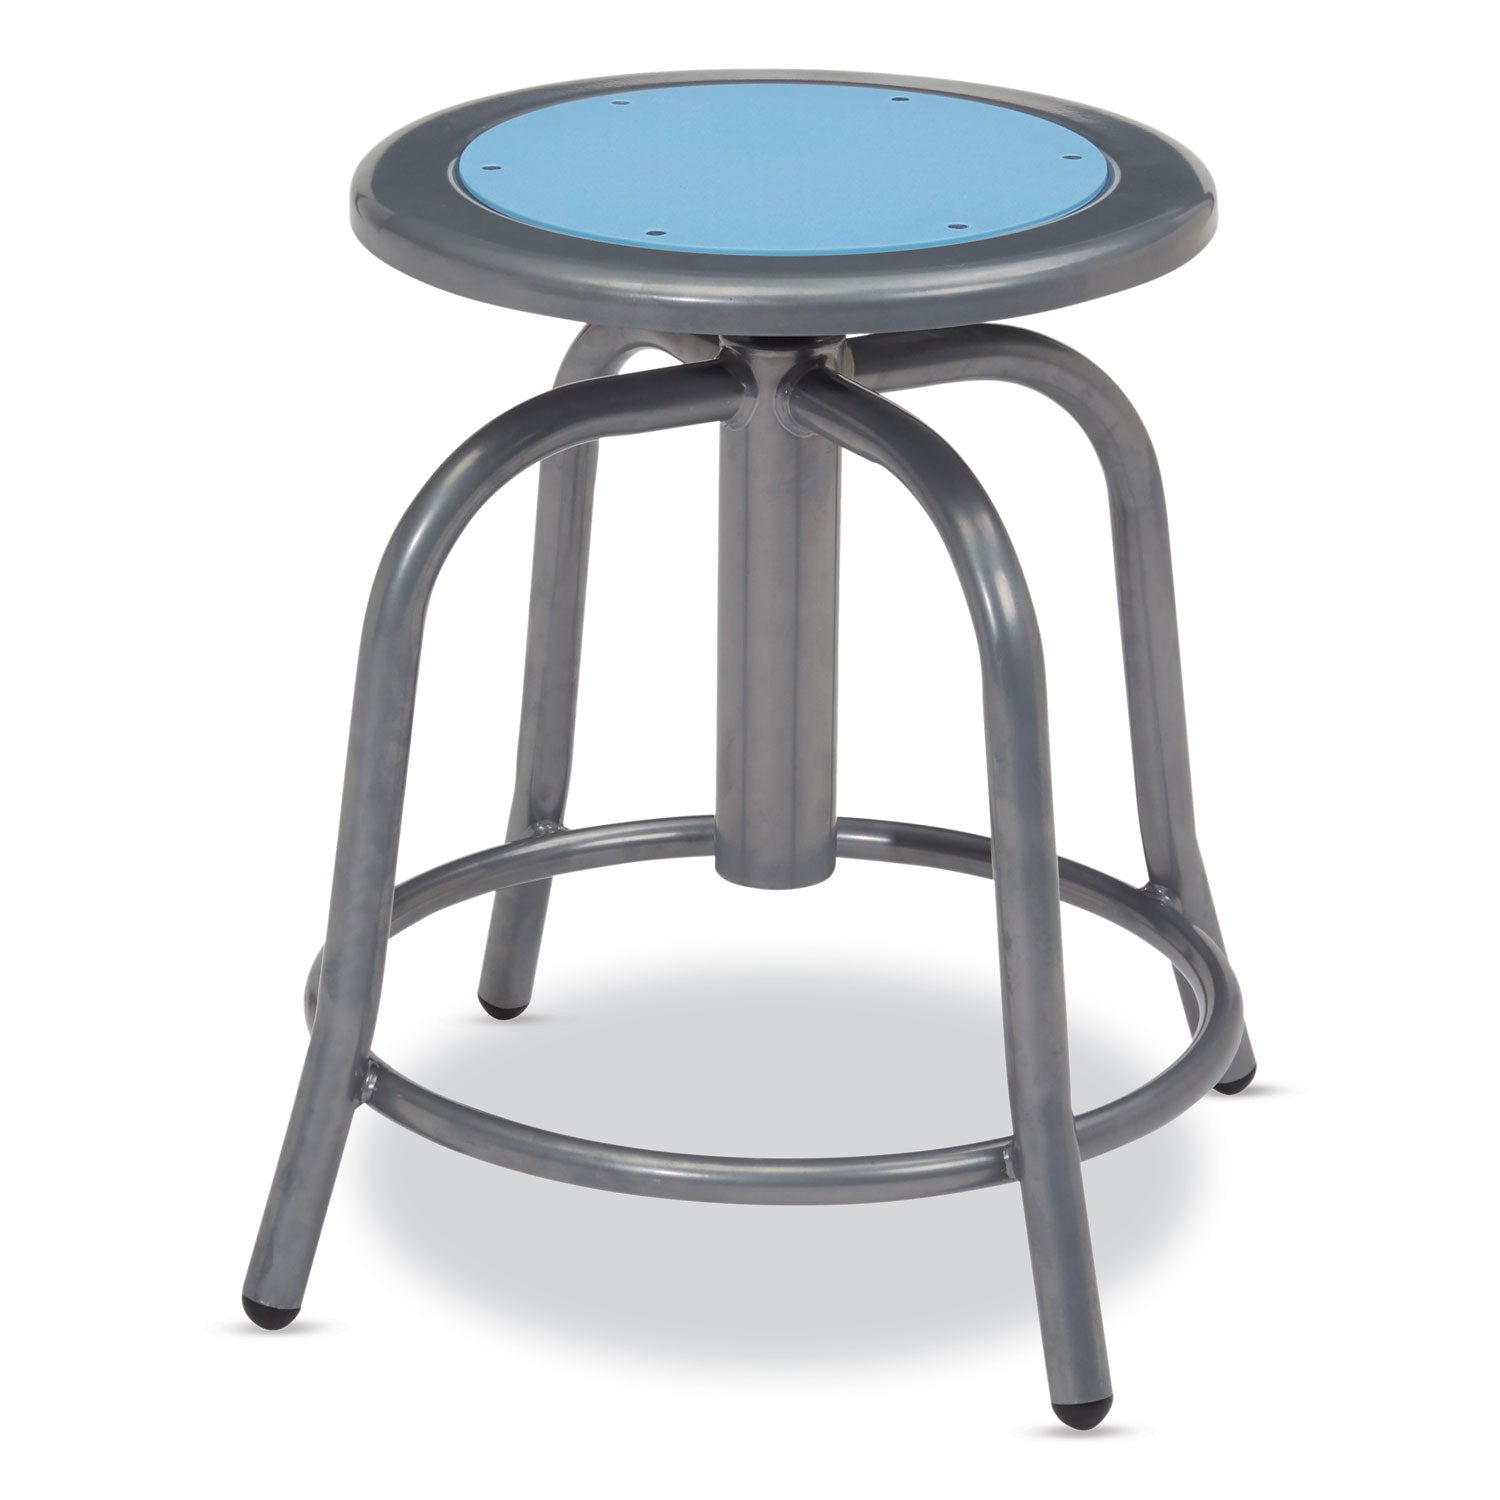 6800-series-height-adj-metal-seat-stool-supports-300-lb-18-24-seat-ht-blueberry-seat-gray-base-ships-in-1-3-bus-days_nps680502 - 1